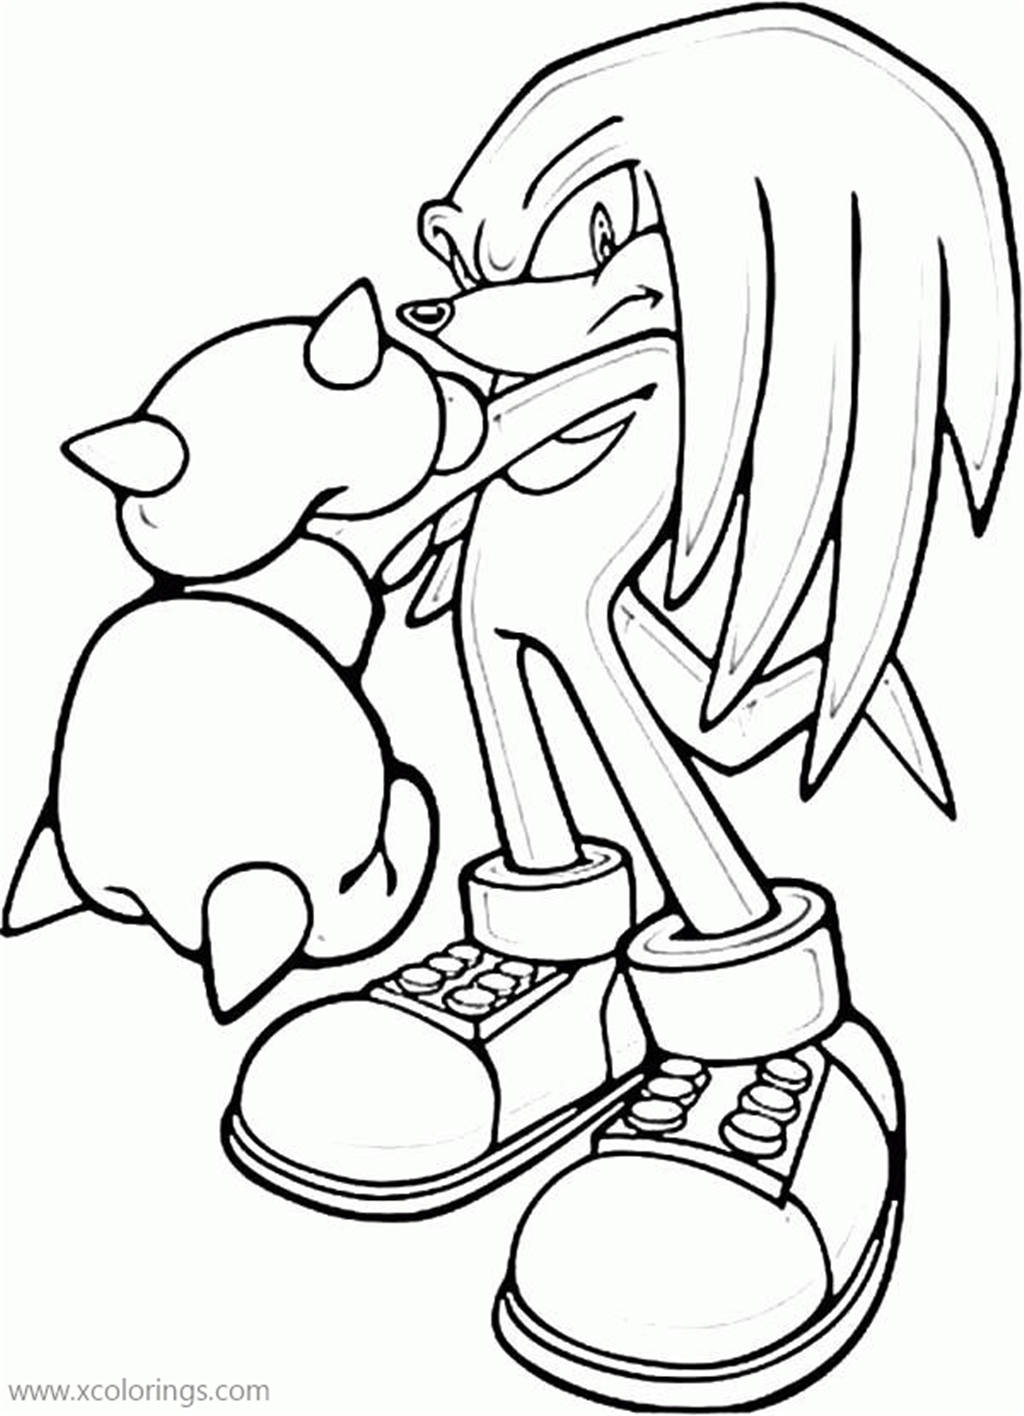 Knuckles Coloring Page from Sonic the Hedgehog - XColorings.com